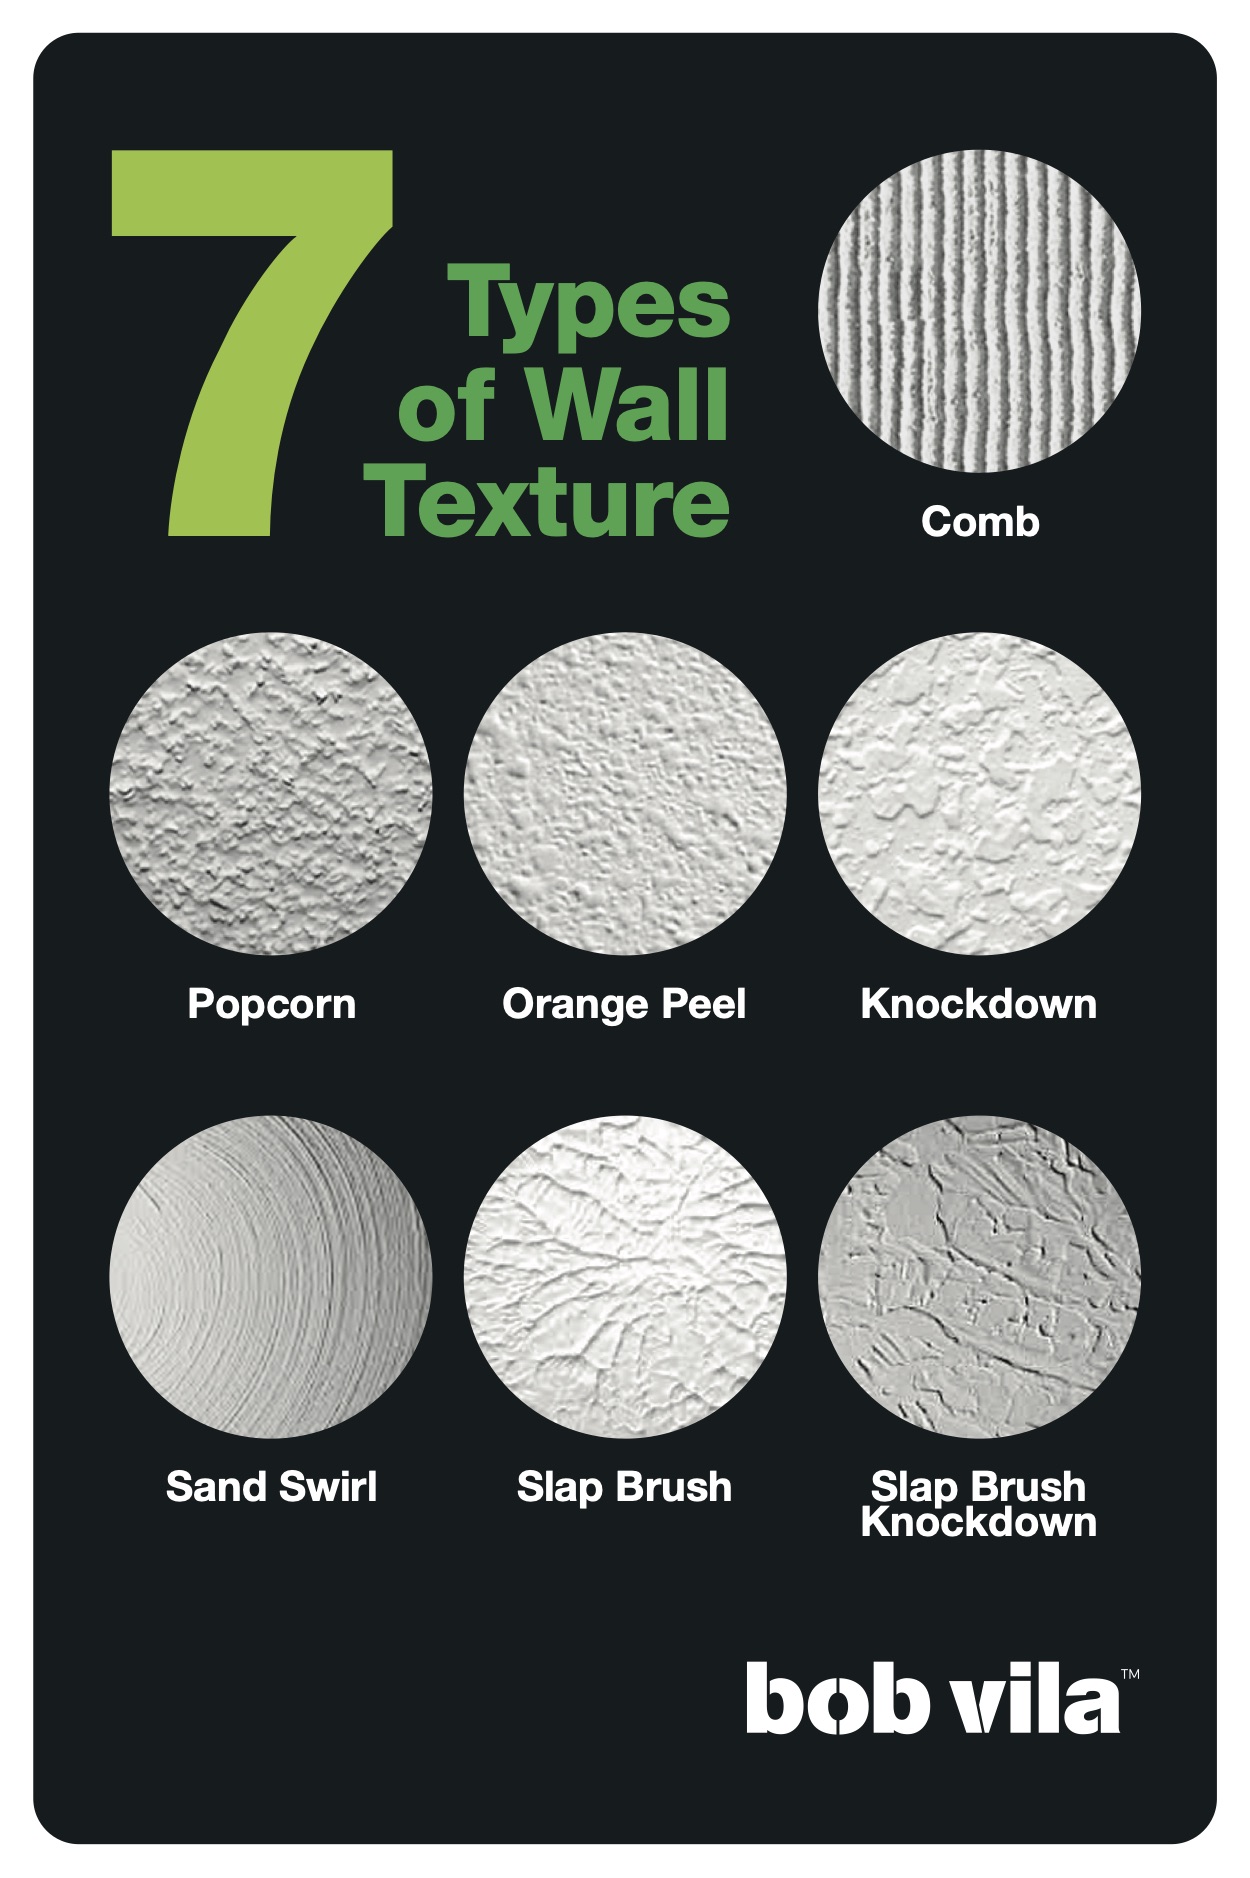 Types of wall texture